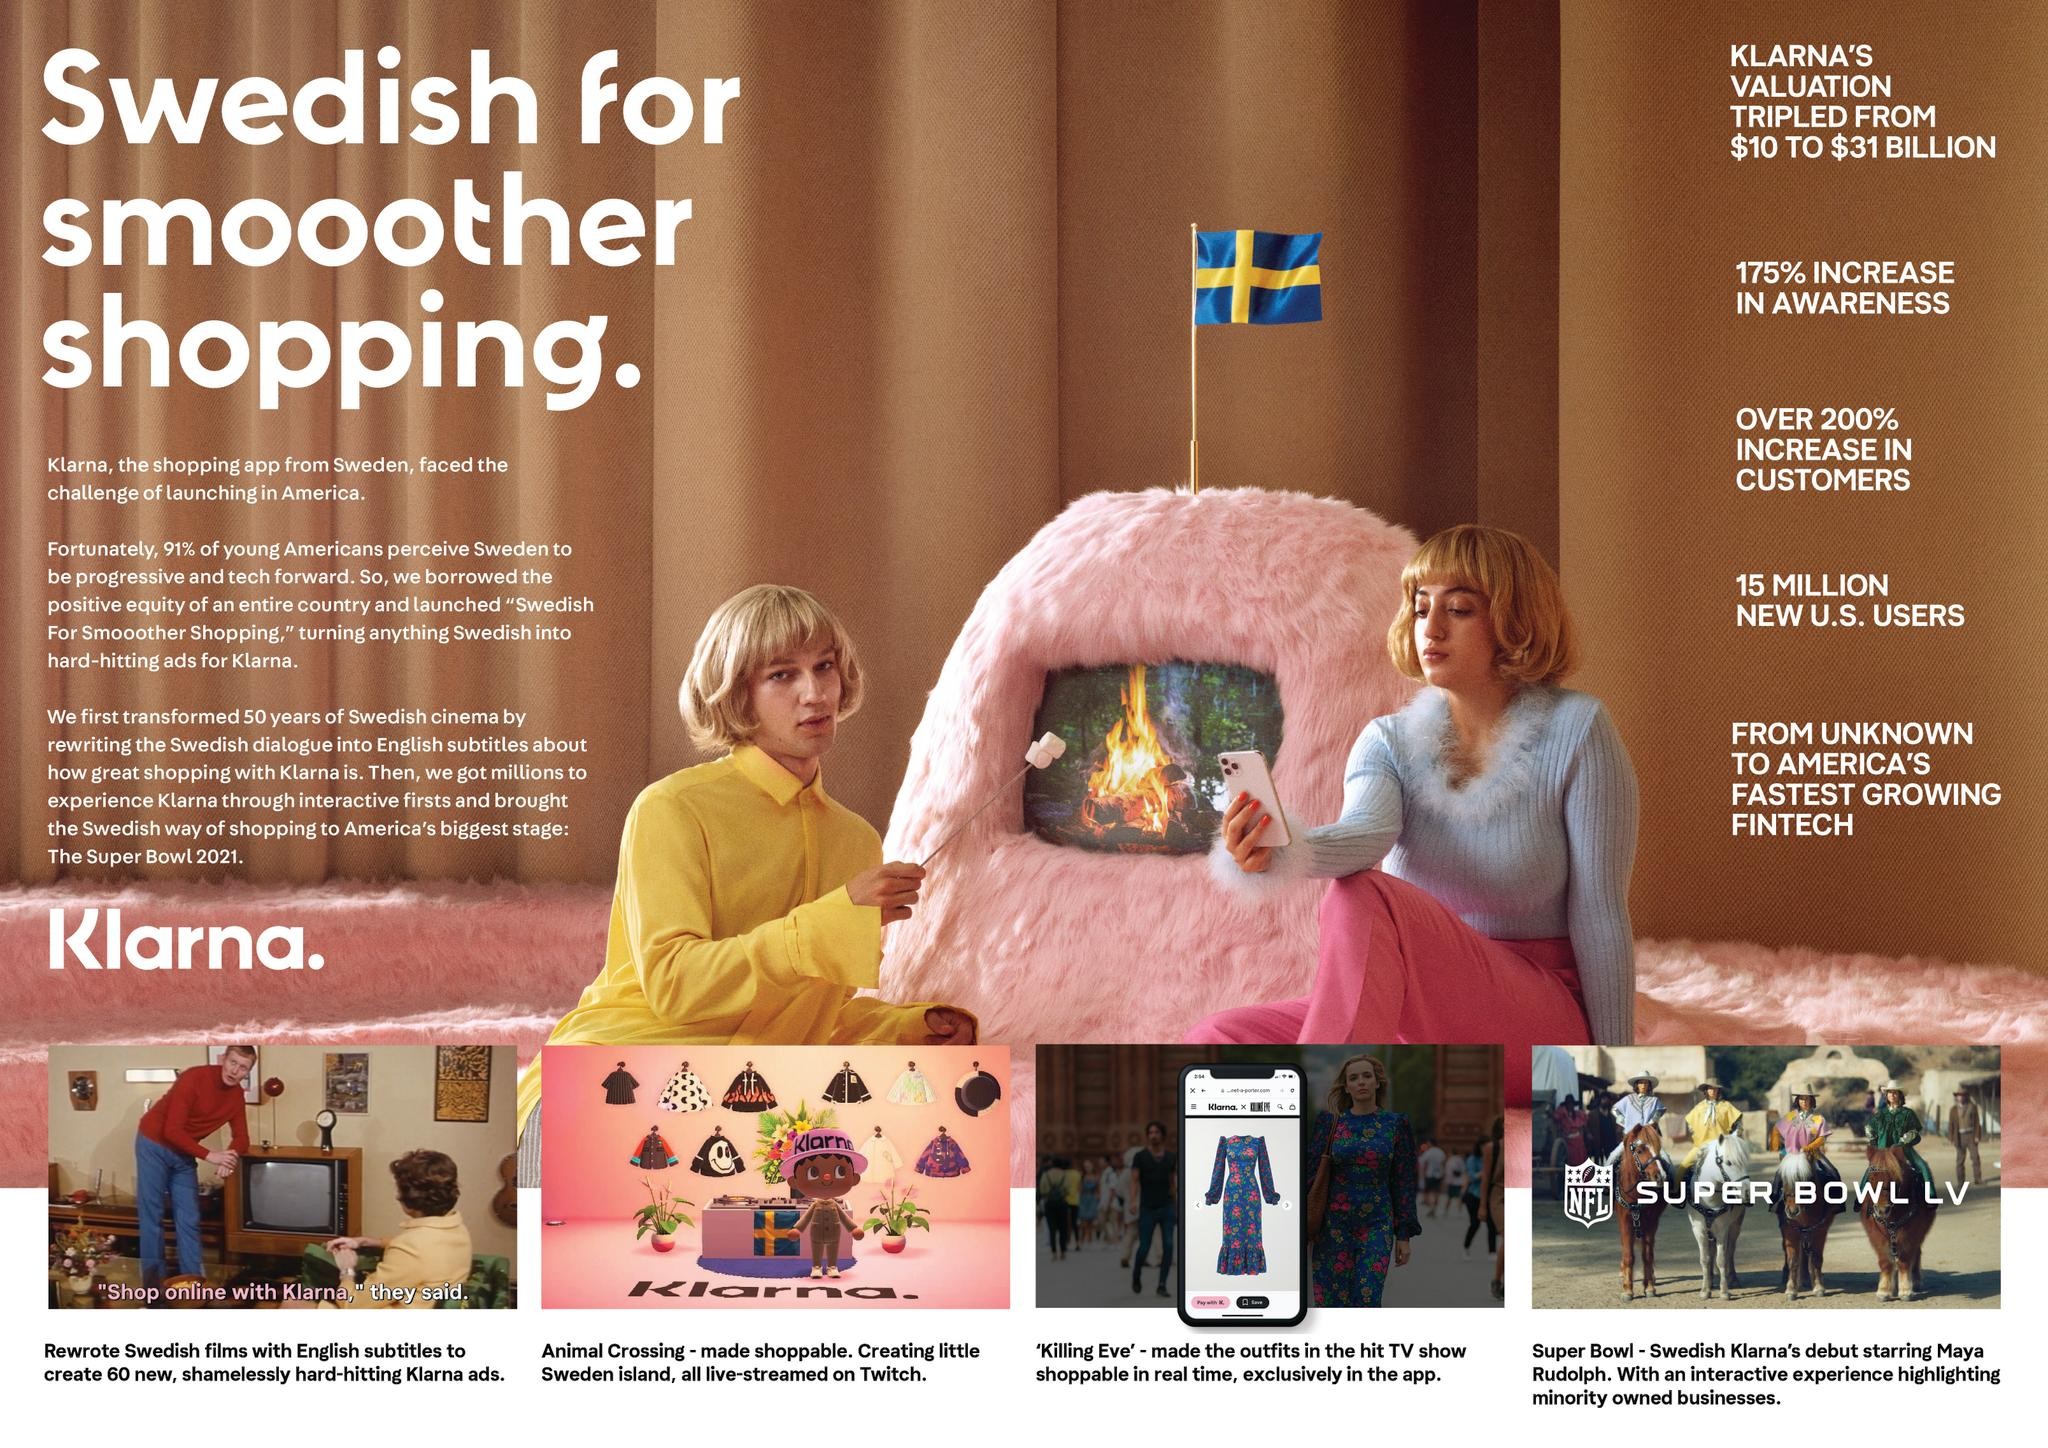 KLARNA. SWEDISH FOR SMOOOTHER SHOPPING. 